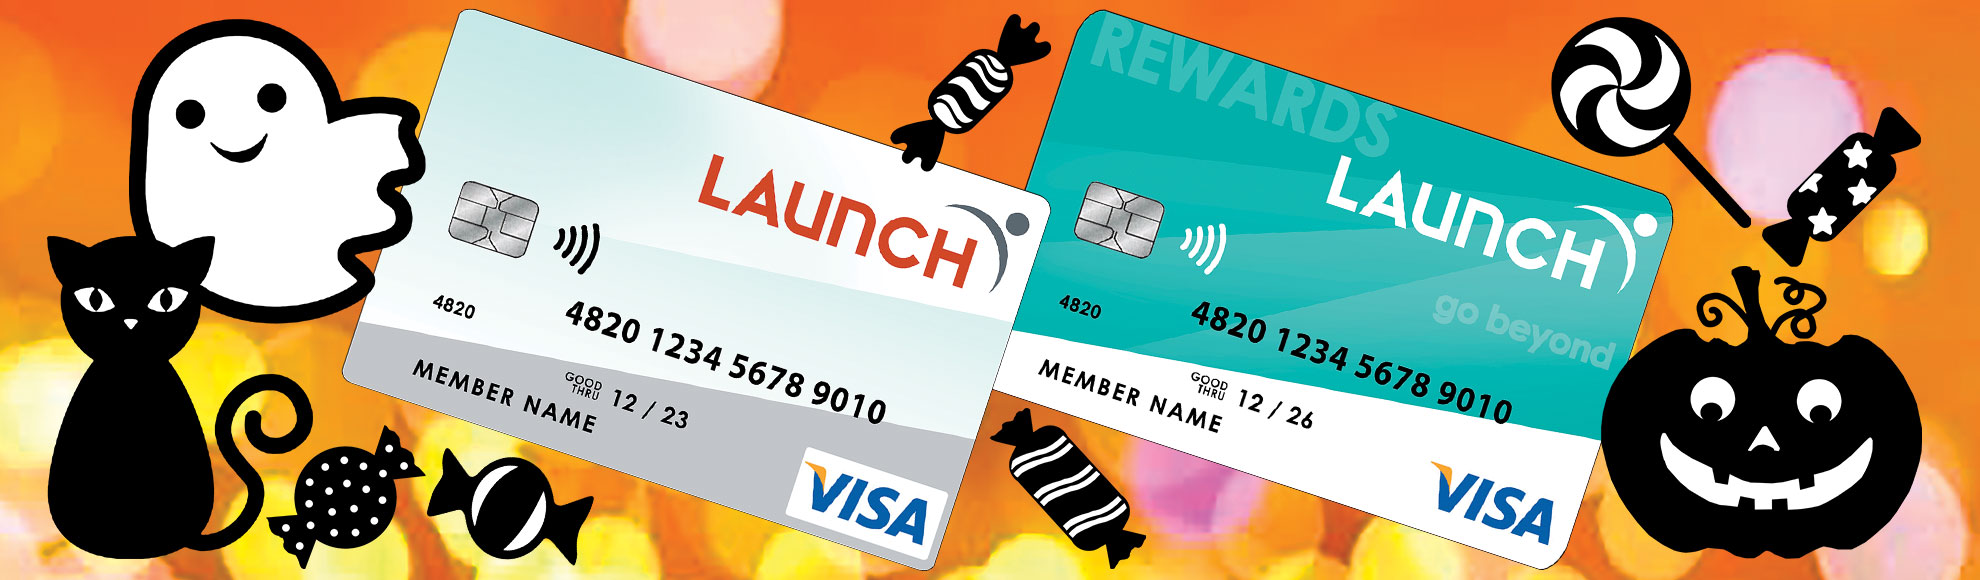 Halloween theme with 2 Launch CU Credit Cards